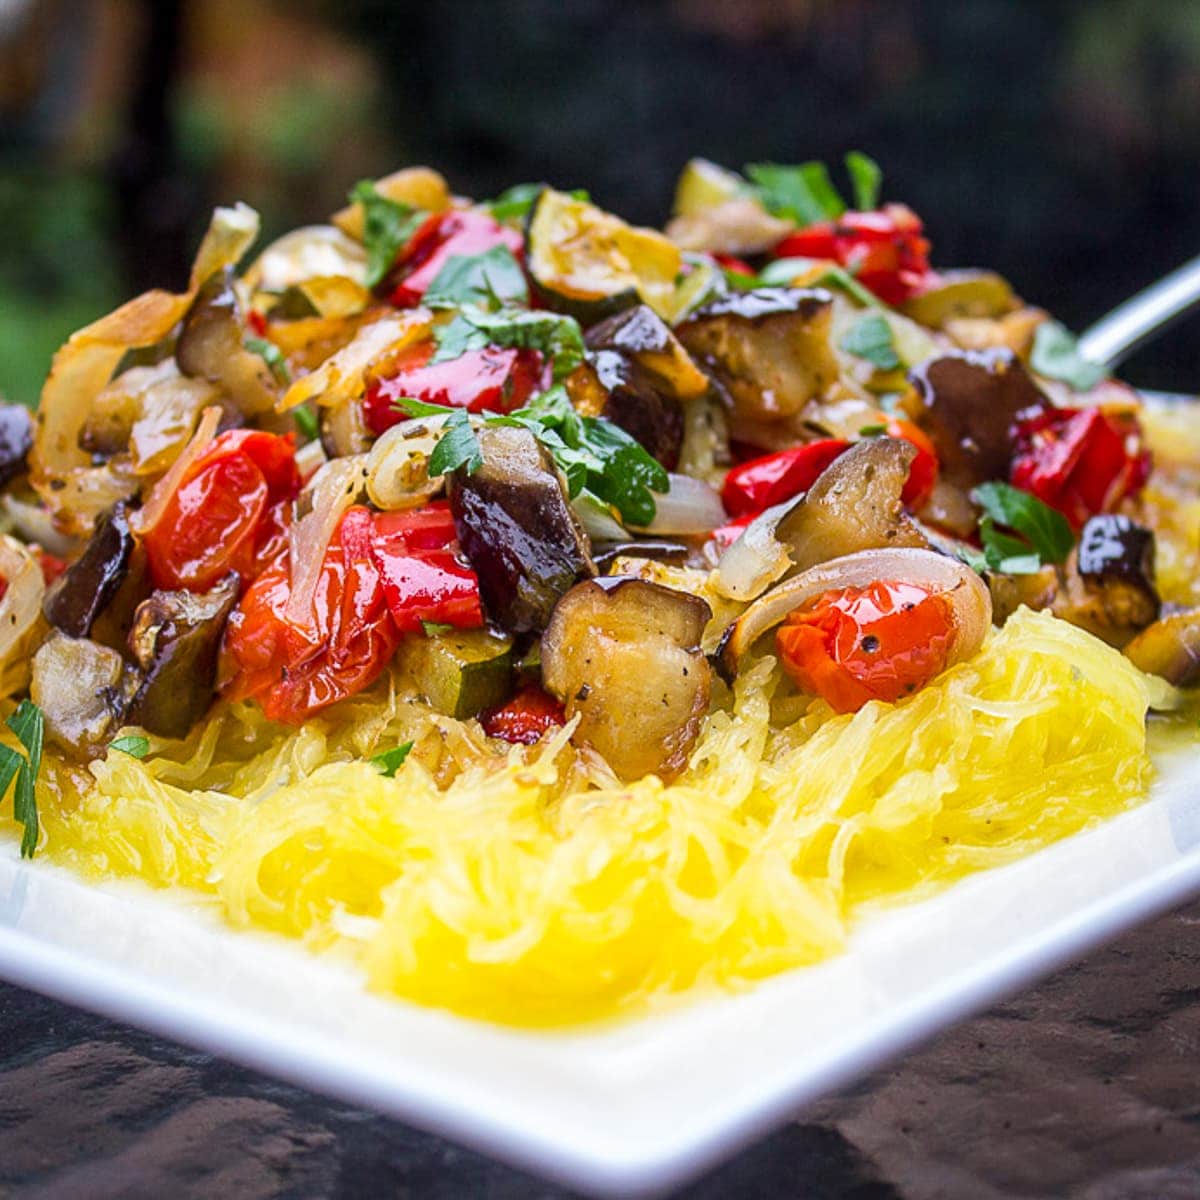 spaghetti squash topped with roasted vegetables on plate